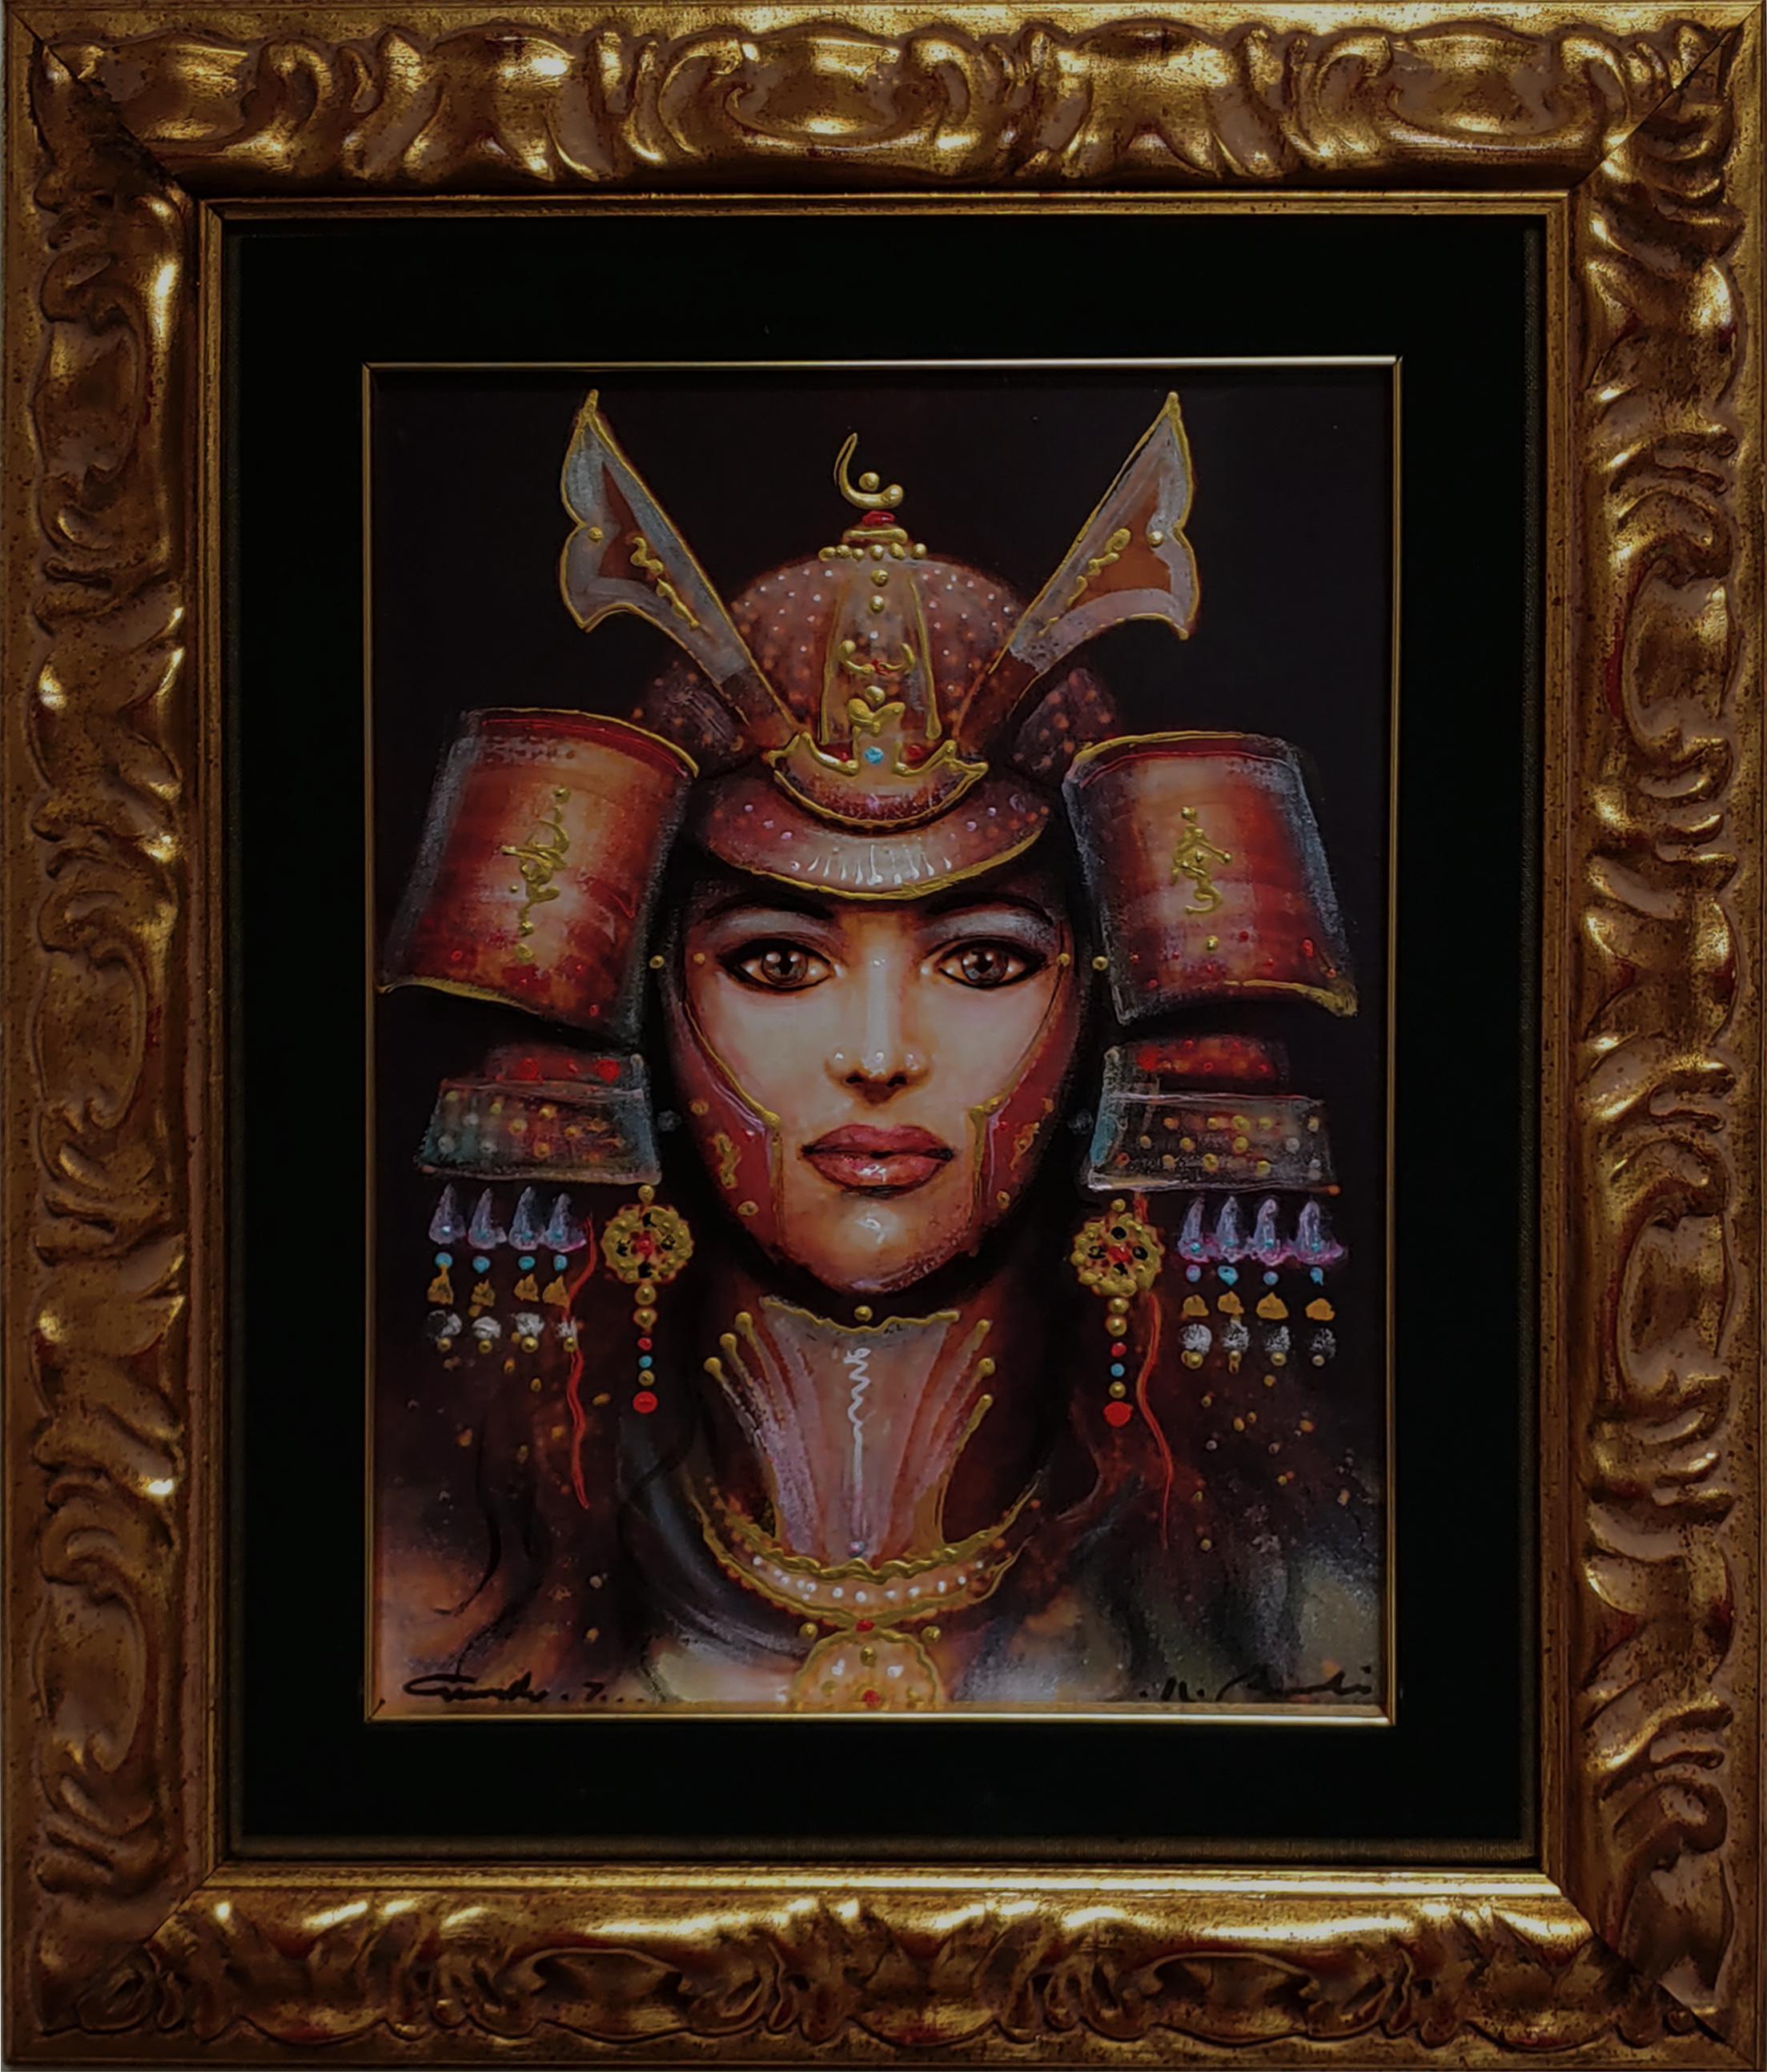 Item is in excellent condition and has only been displayed in a gallery setting. Item includes frame; framed dimensions are approximately 24 x 20 inches.

Born in Lucca, Italy in 1947, Giampaolo Bianchi is an artist who uses ideas of myth to create